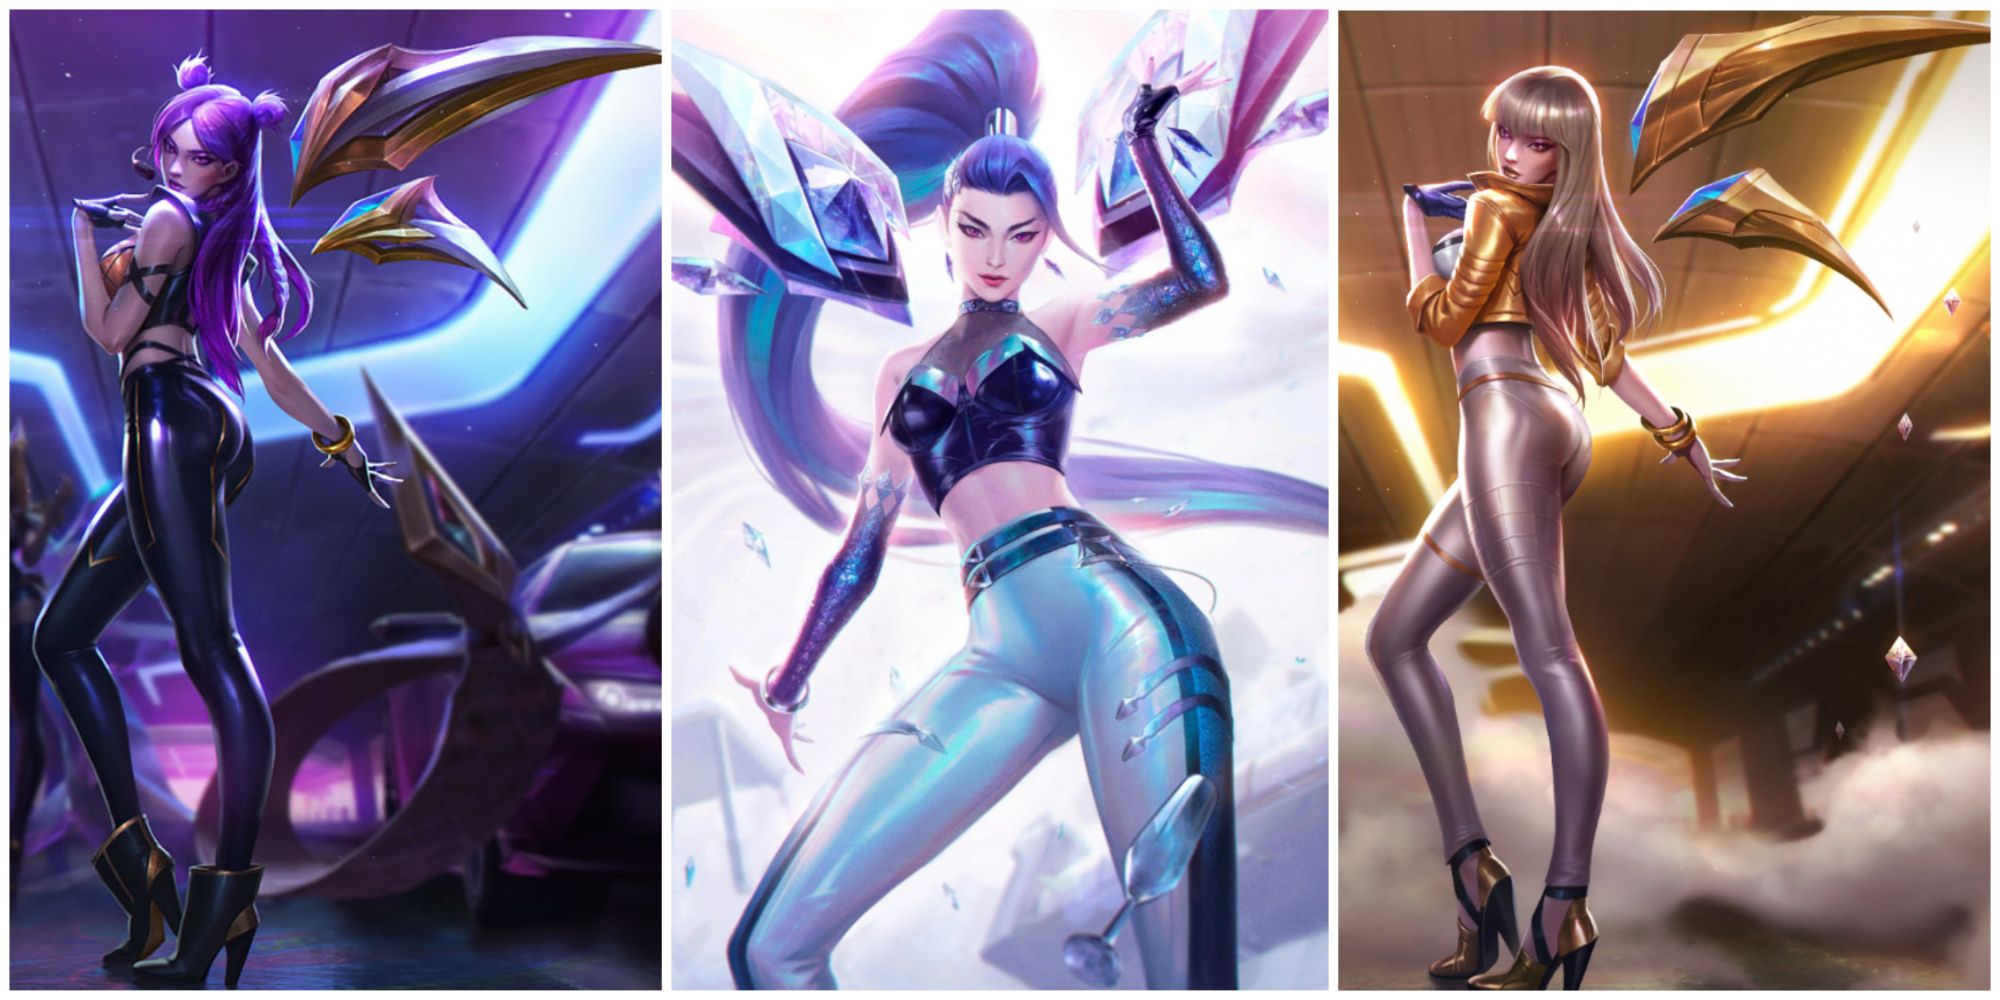 KDA KaiSa making that drum go dum as she poses in her POP STARS skins, both base and prestige, and her sparkly ALL OUT Skin